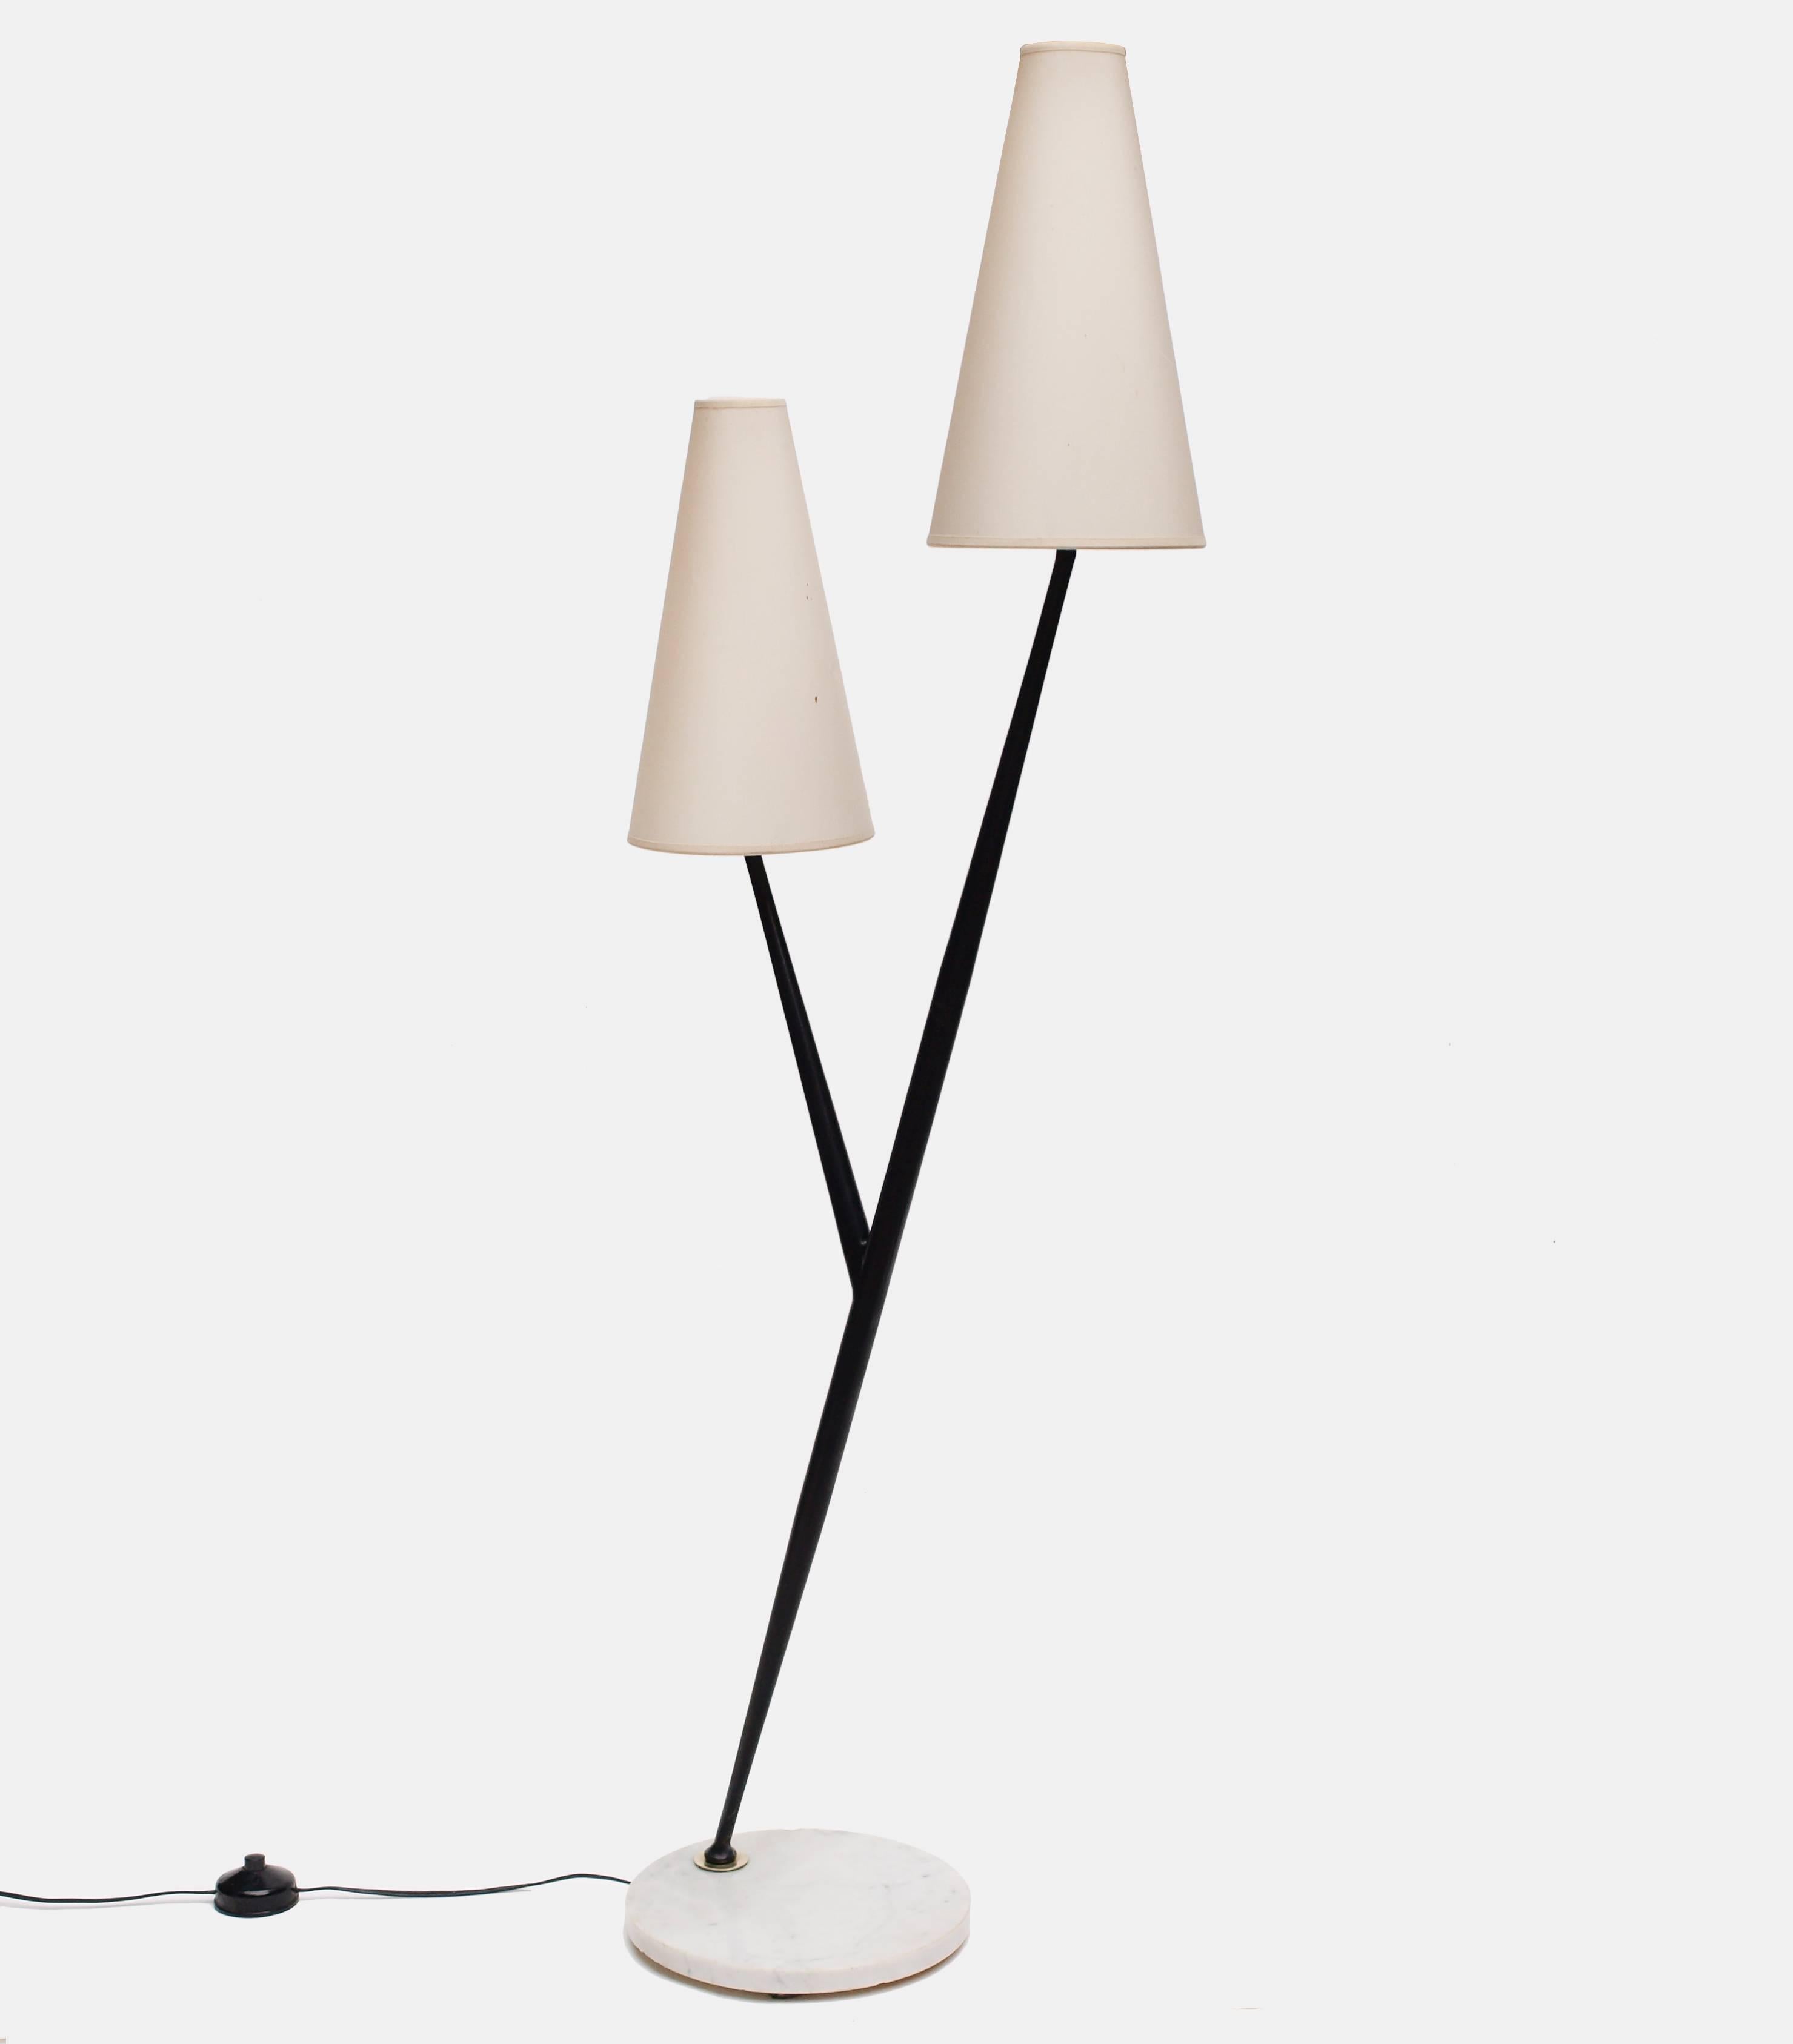 A rare and chic, 1960s floor lamp by Maison Lunel.
Rising from a white marble base a single tapered matte black branch splits at the mid-point to make a double headed lamp with its original silk shades.
Formed in the shaped of a Y this lamp has